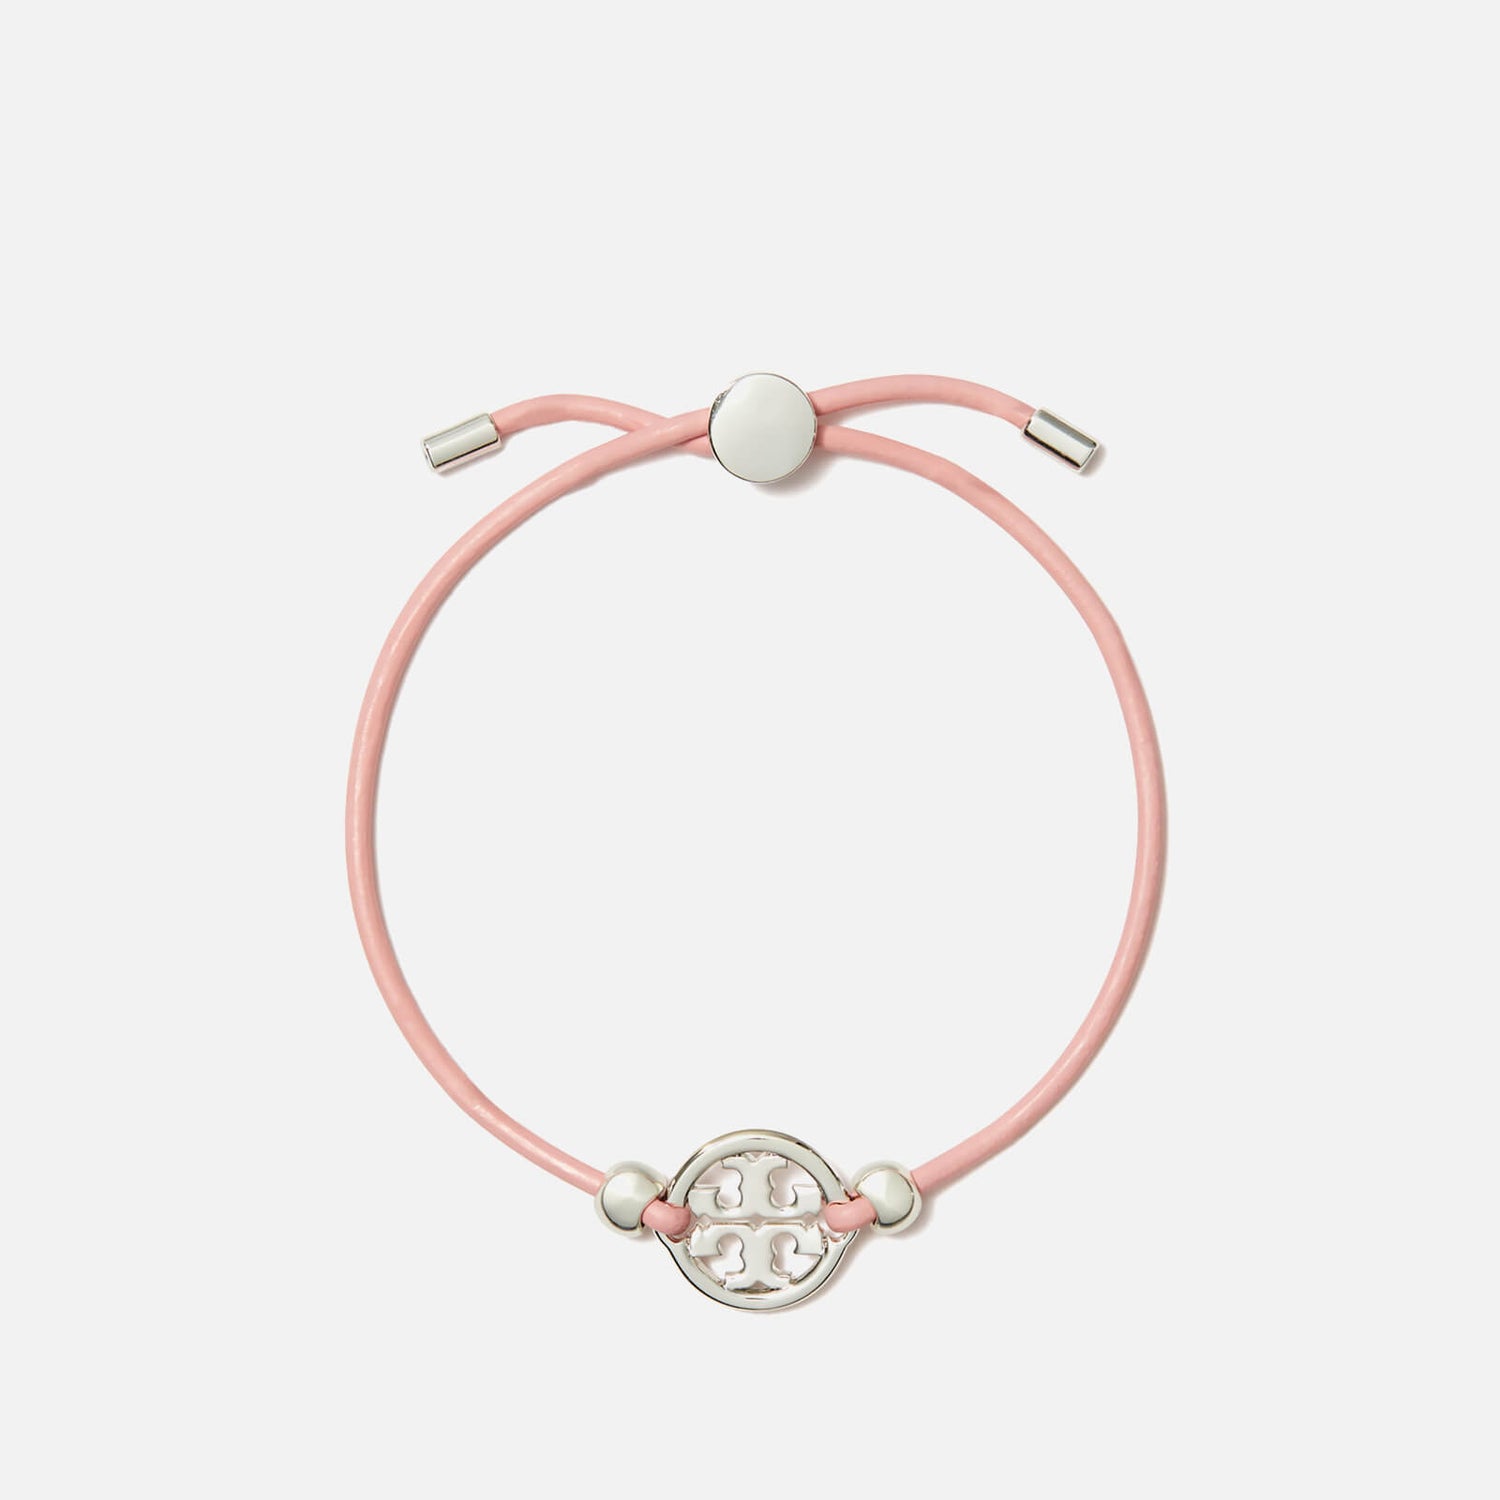 Tory Burch Miller Silver-Tone, Leather and Crystal Slider Bracelet